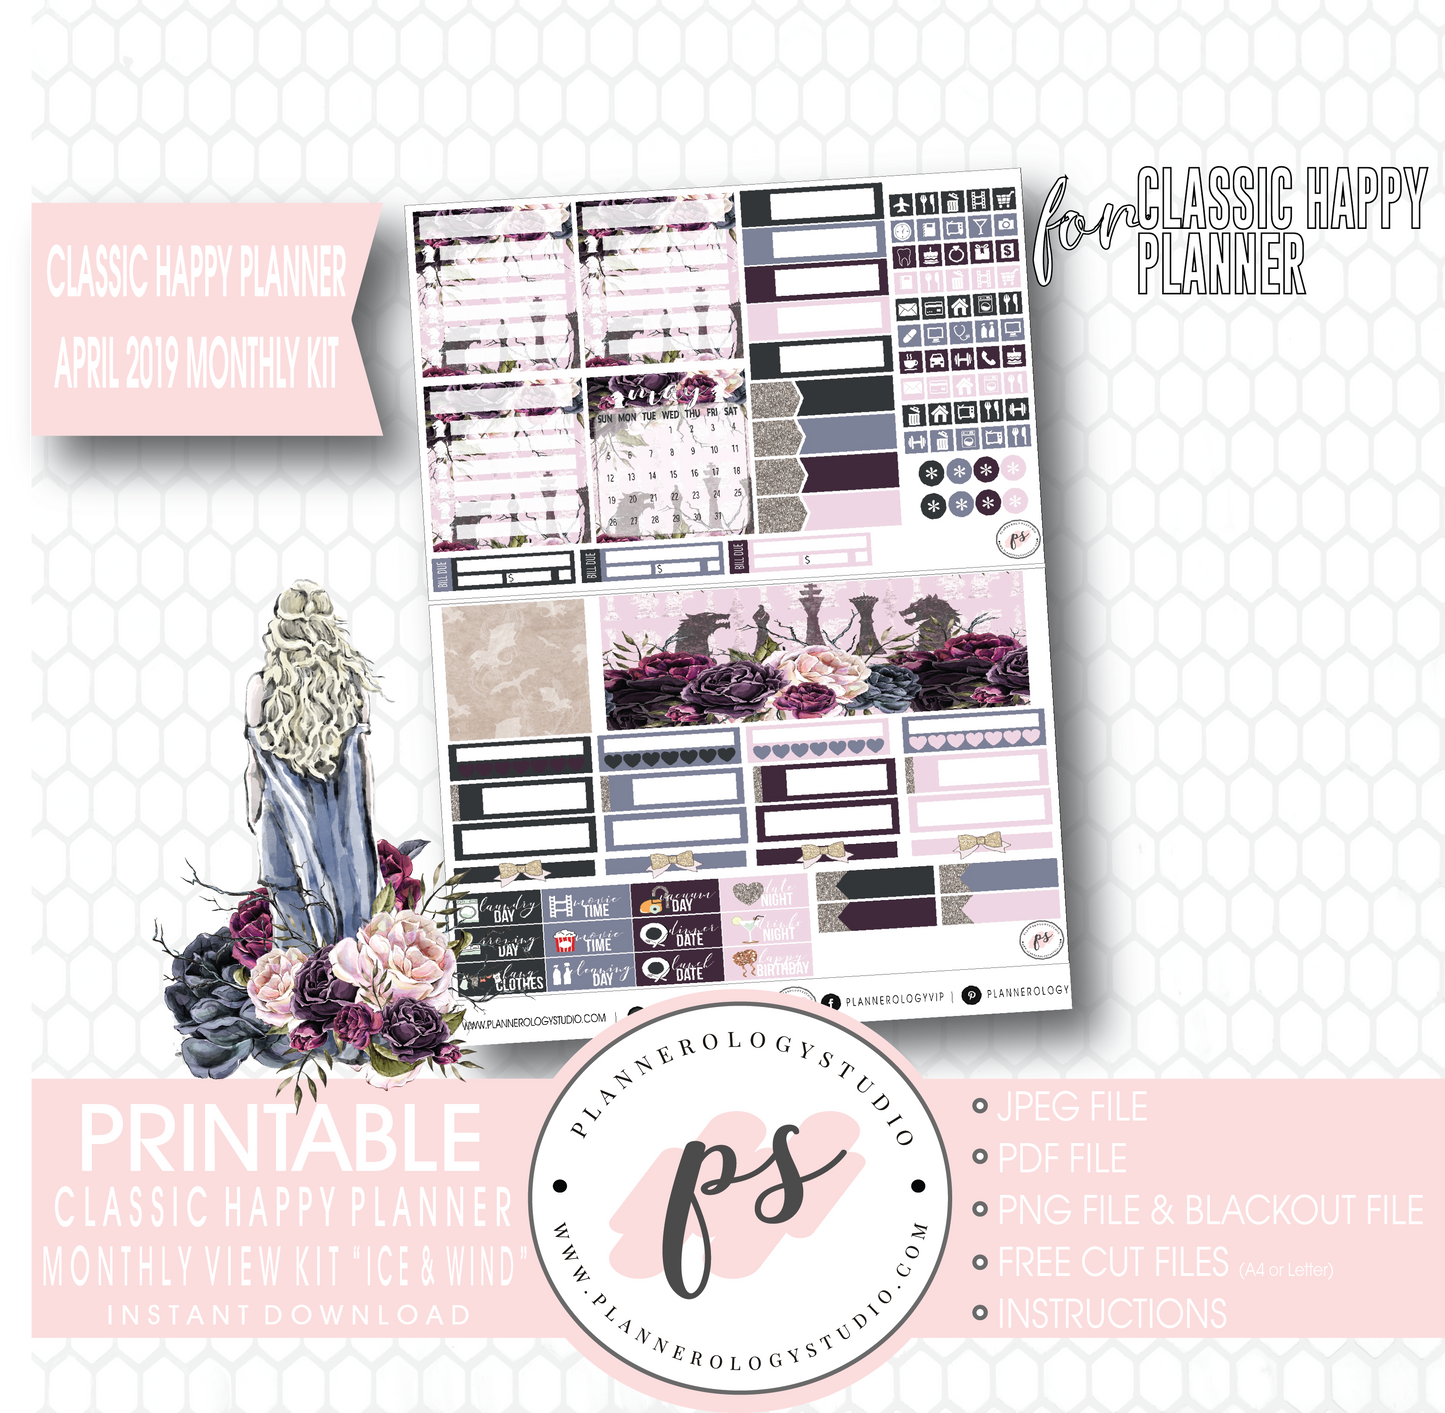 Ice & Wind (Game of Thrones) April 2019 Monthly View Kit Digital Printable Planner Stickers (for use with Classic Happy Planner) - Plannerologystudio